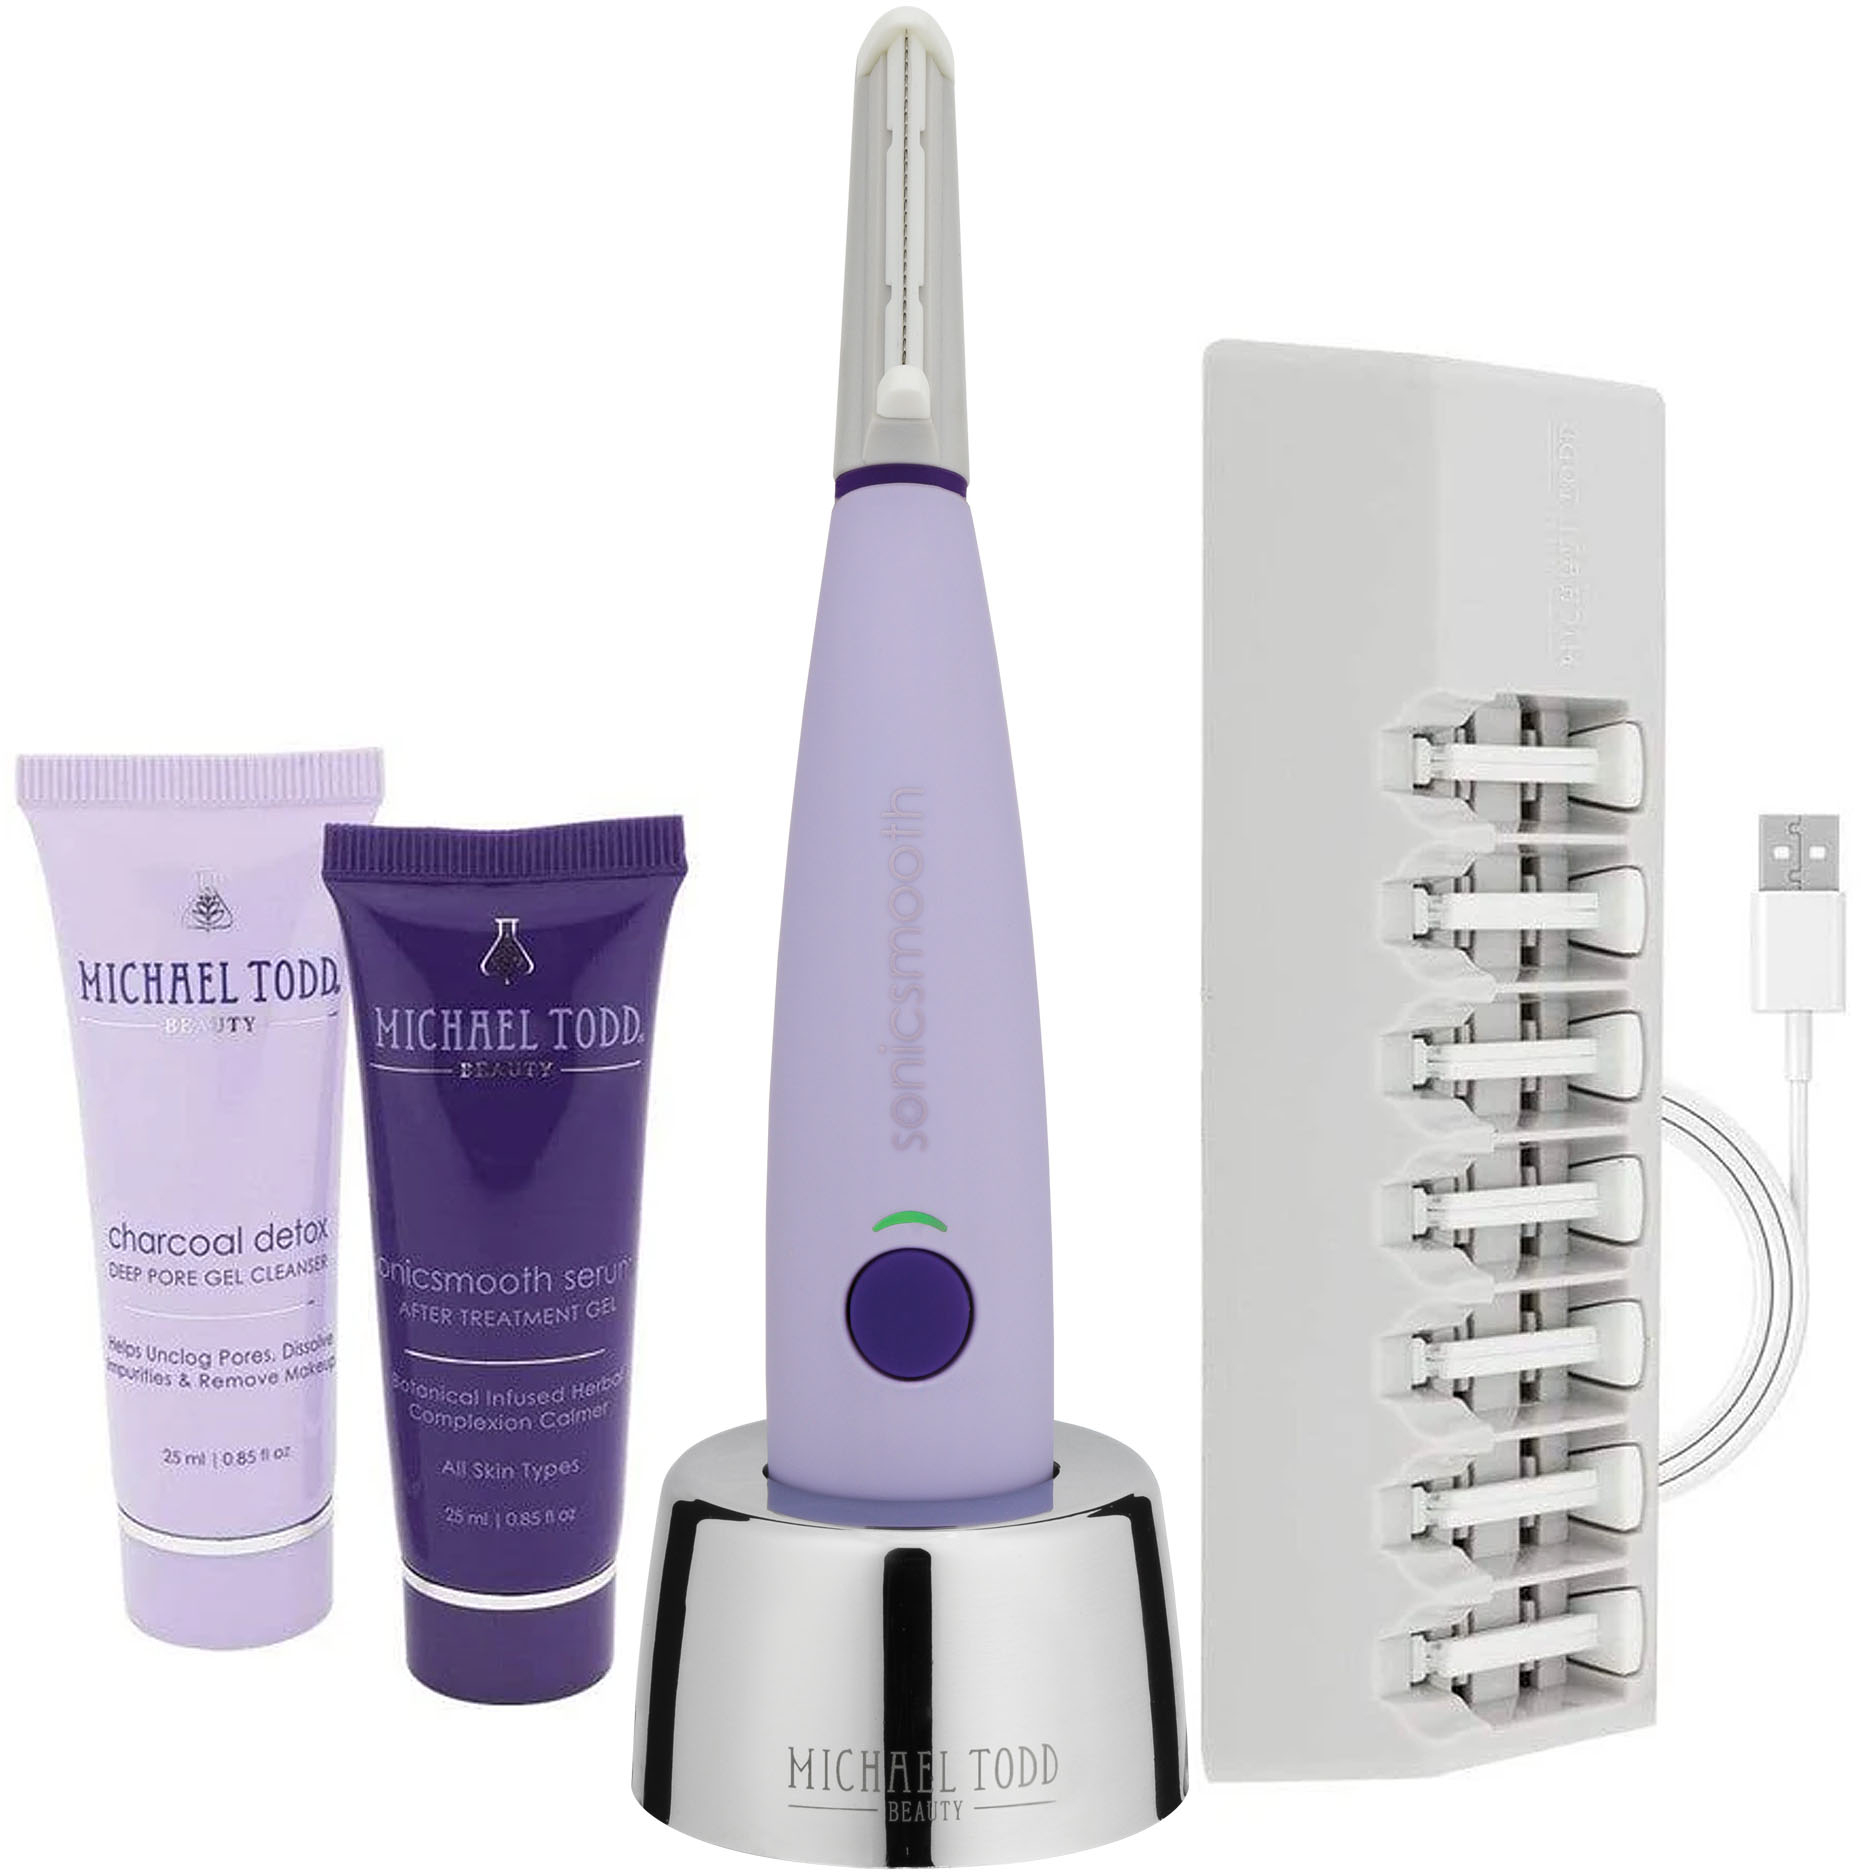 MICHAEL TODD BEAUTY - Sonicsmooth Dermaplaning System